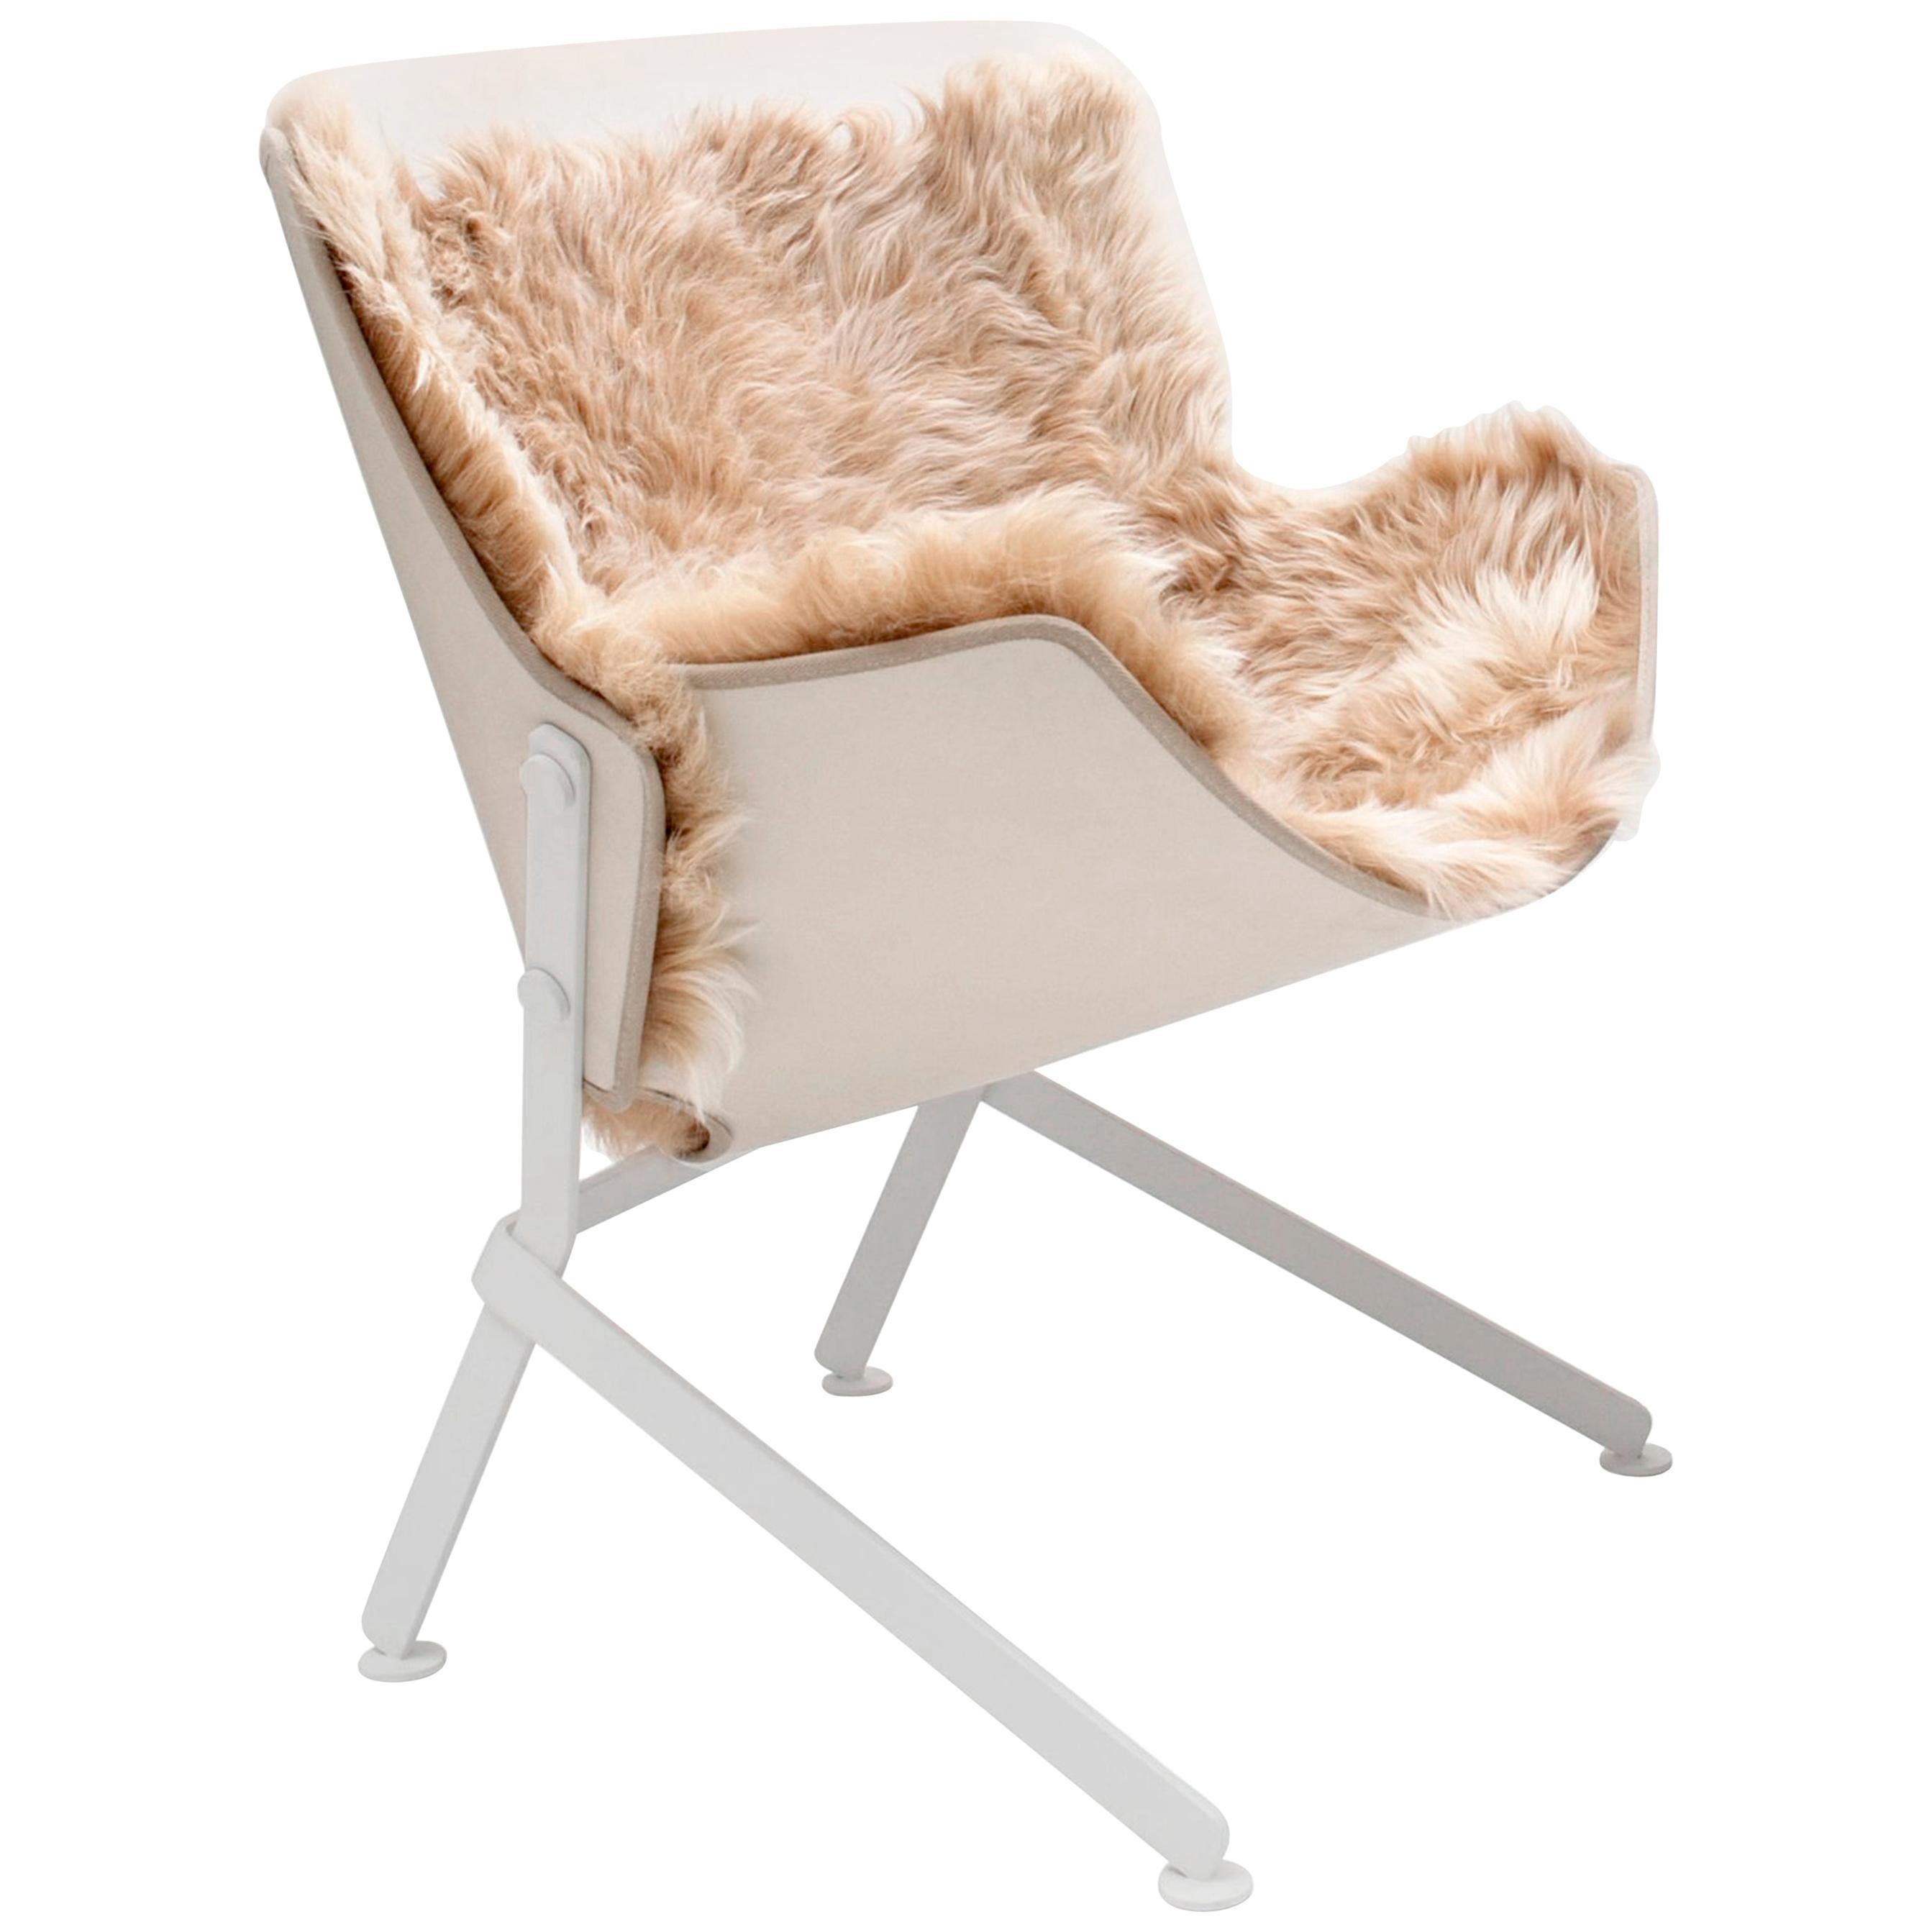 El Santo Powder Coated Steel and Fur Basin Armchair For Sale at 1stDibs